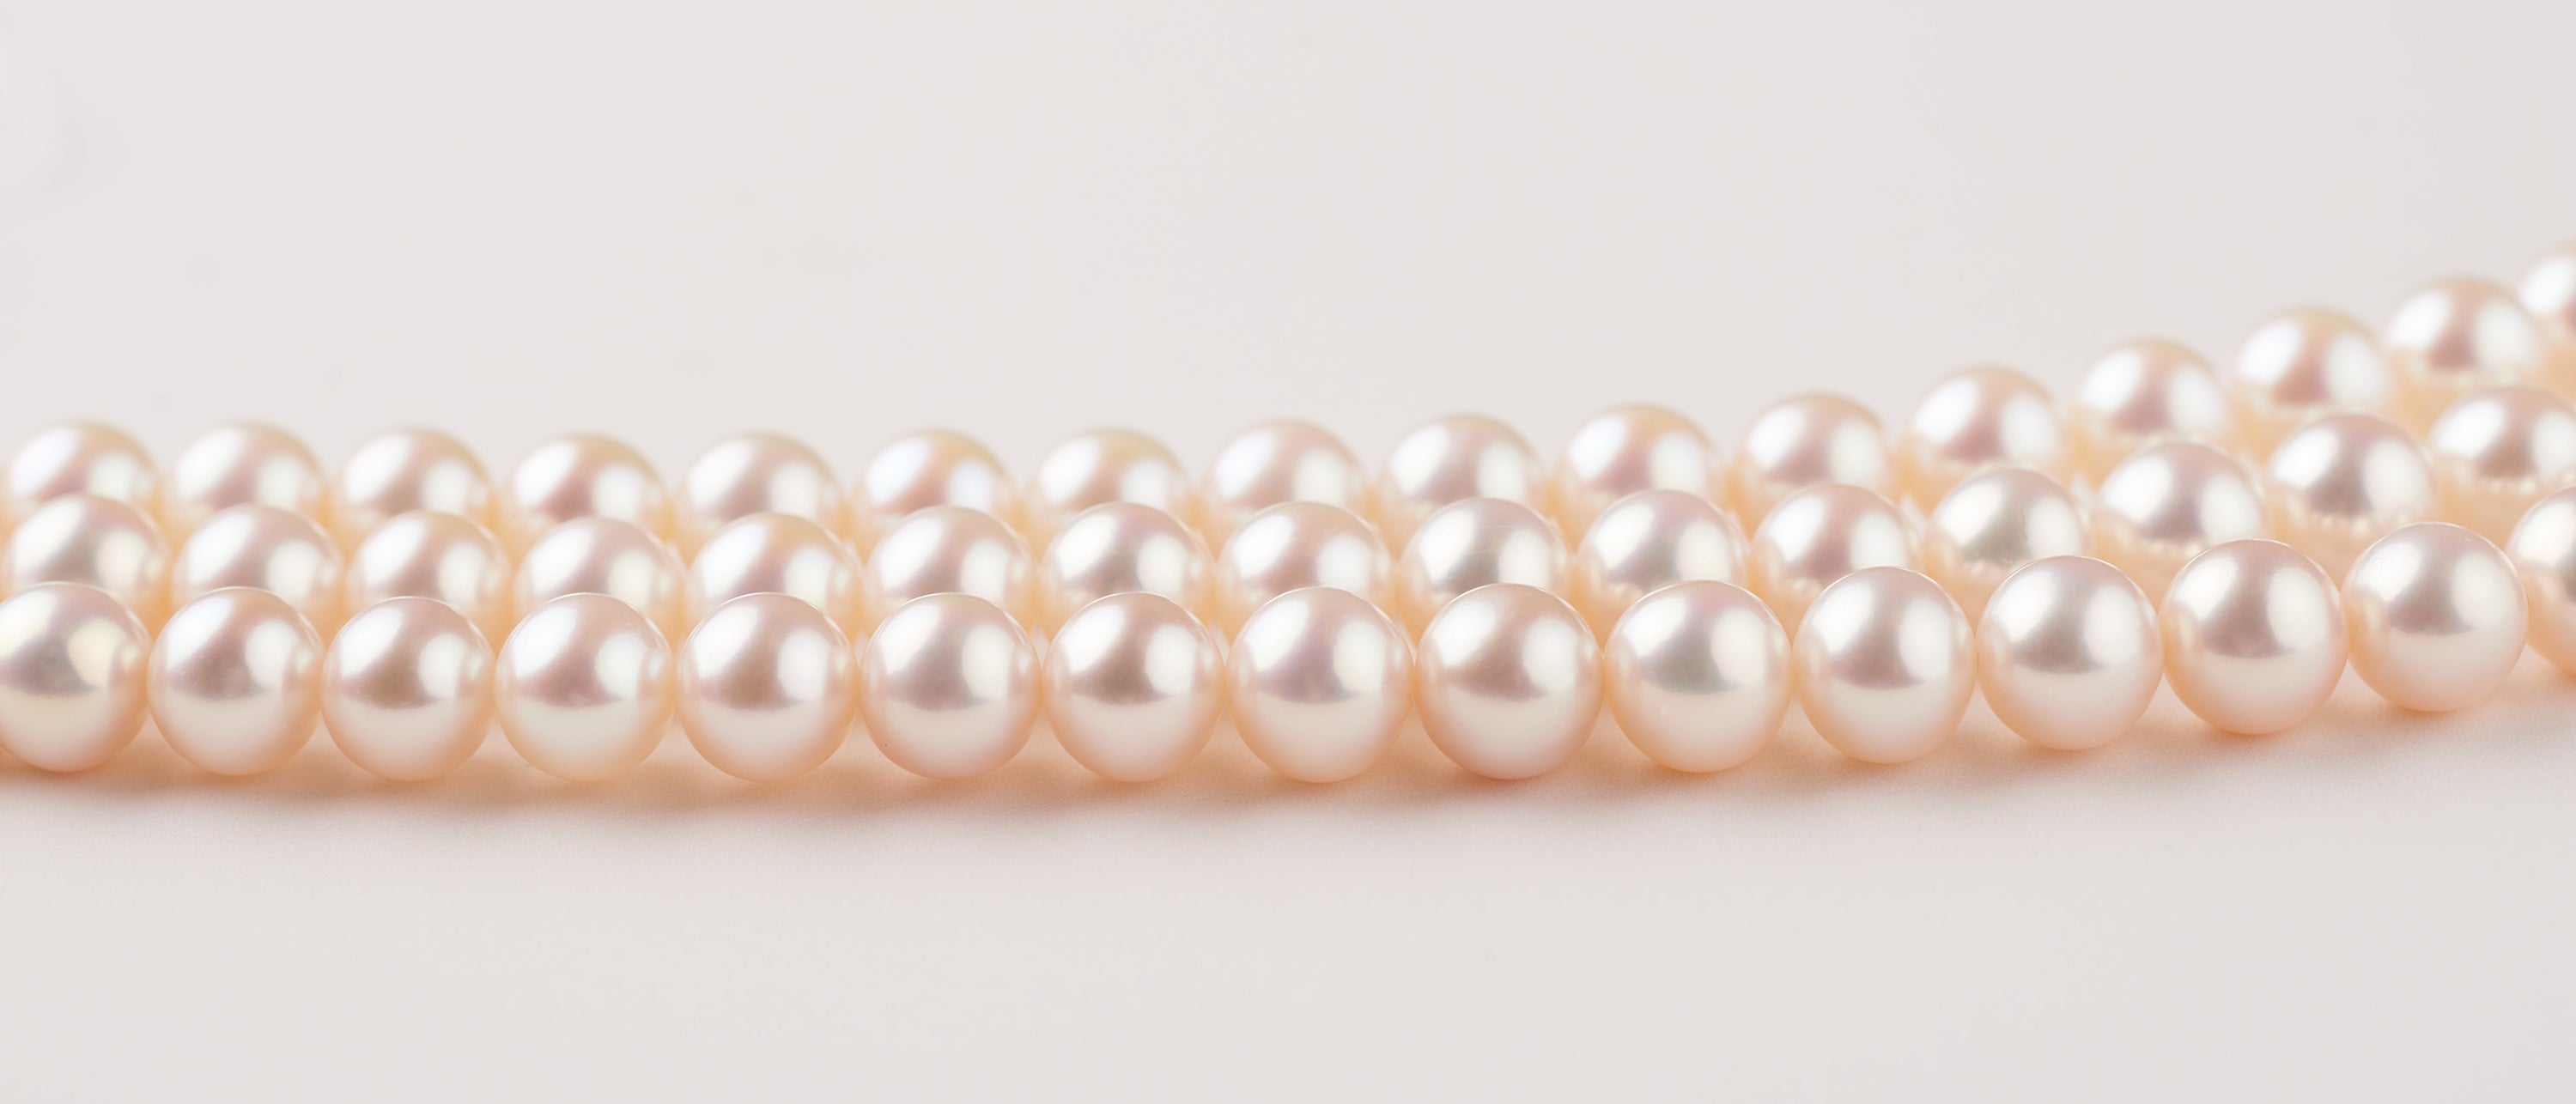 The pearls you are looking for have found a new home :)